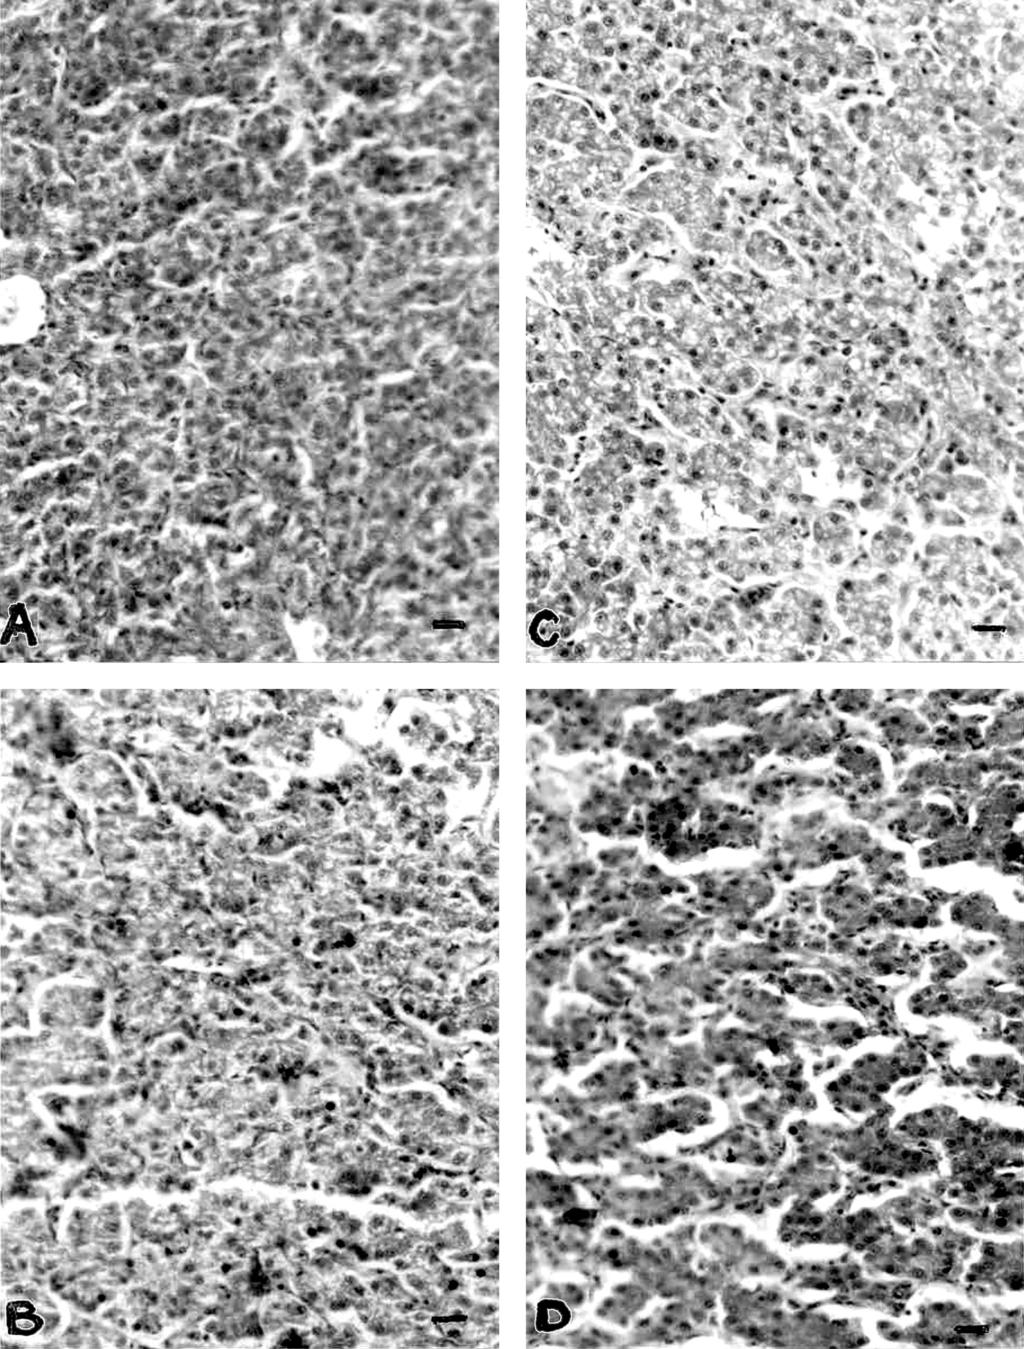 6 MIAZZO ET AL. FIGURE 3. Photomicrographs of hematoxylin and eosin stained liver sections of chicks fed with the following diets: A) control, 0.